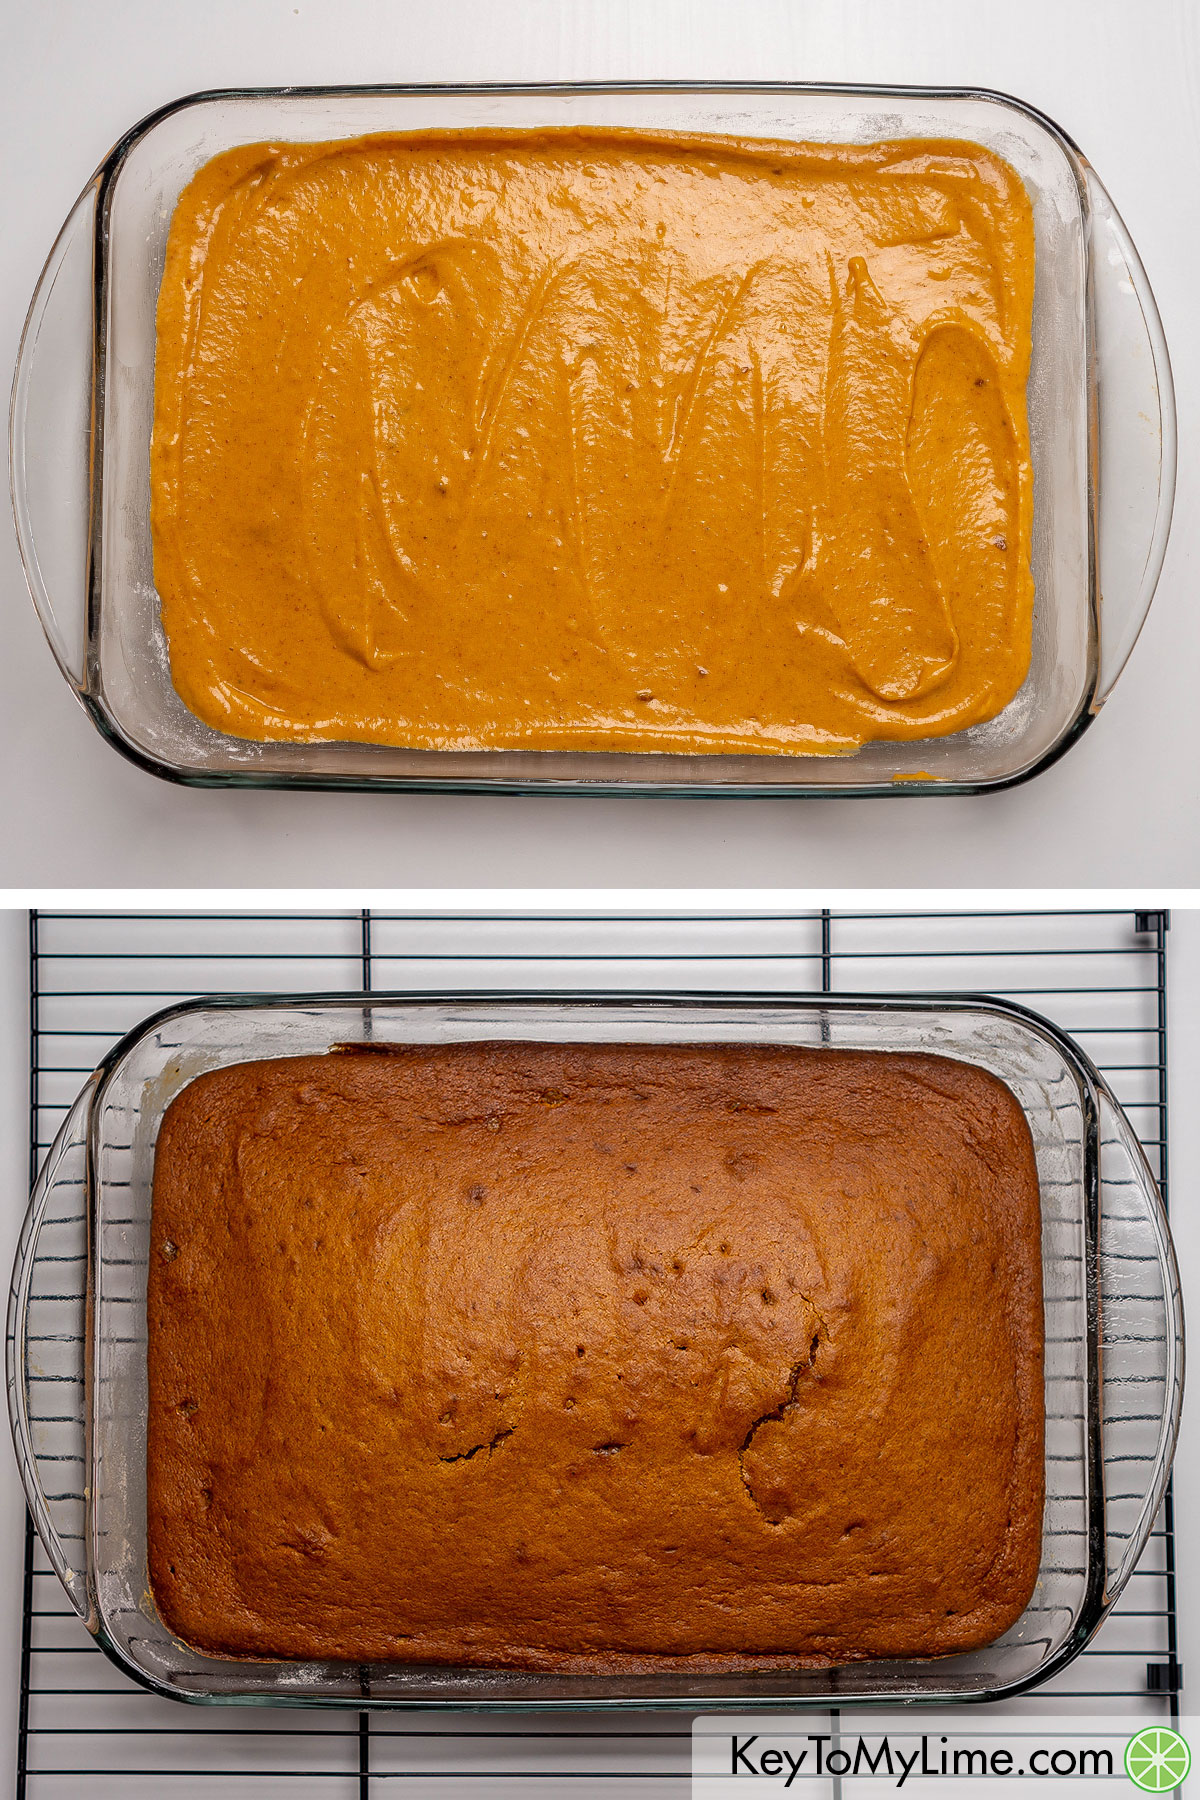 An image showing the before and after baking the pumpkin cake.